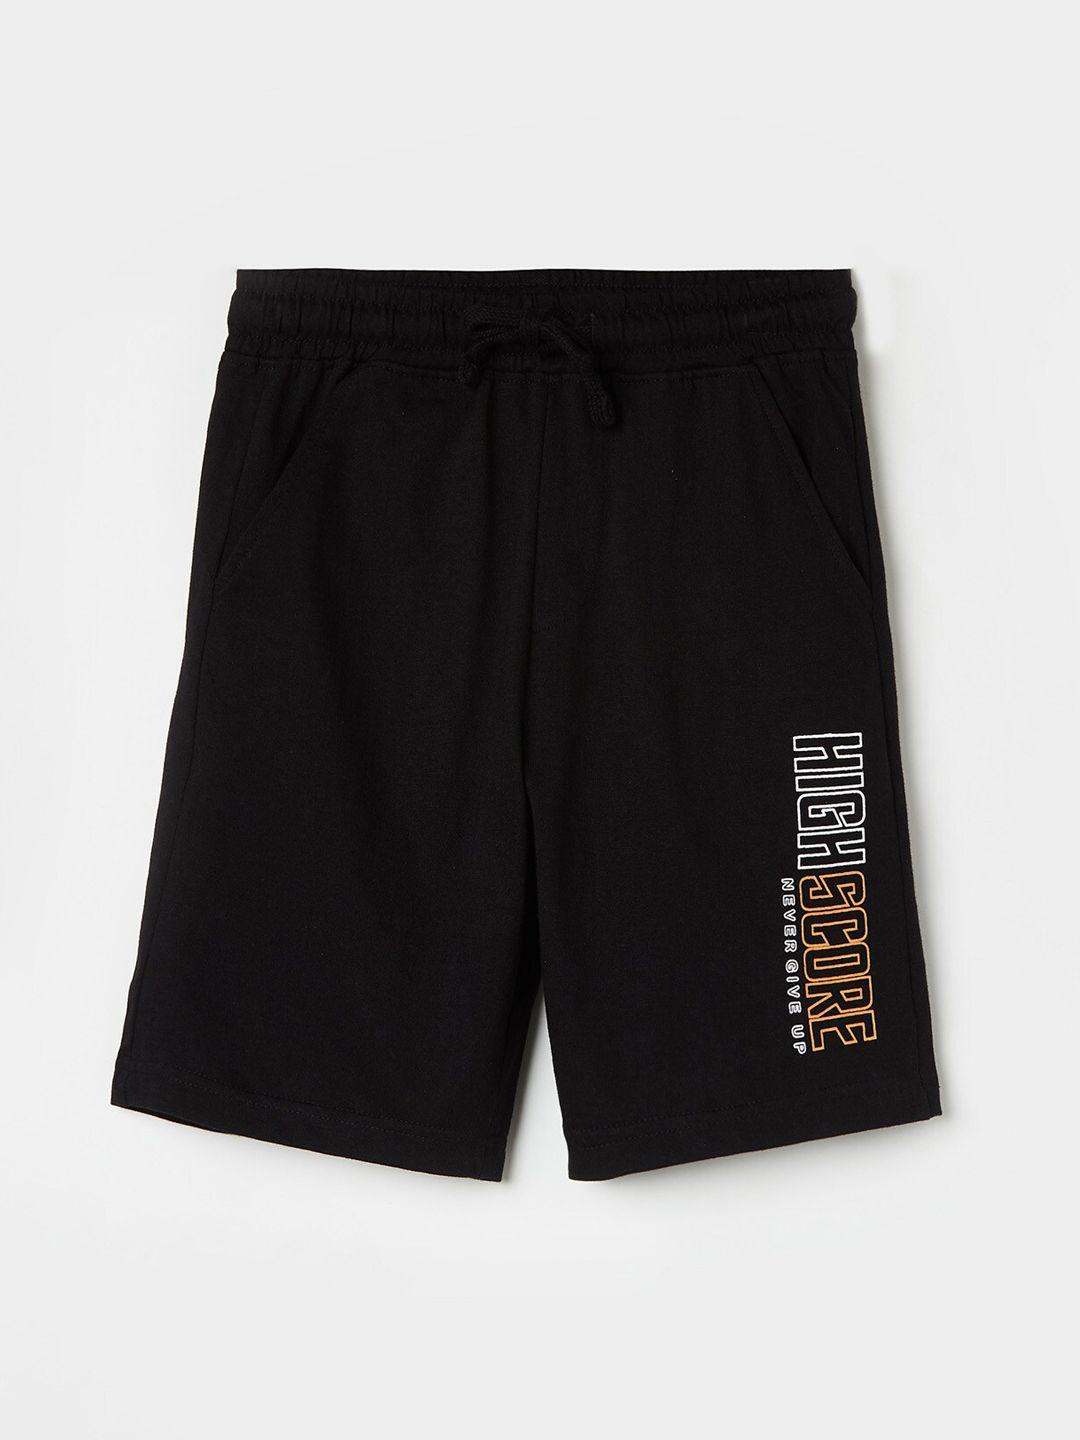 fame-forever-by-lifestyle-boys-black-cotton-shorts